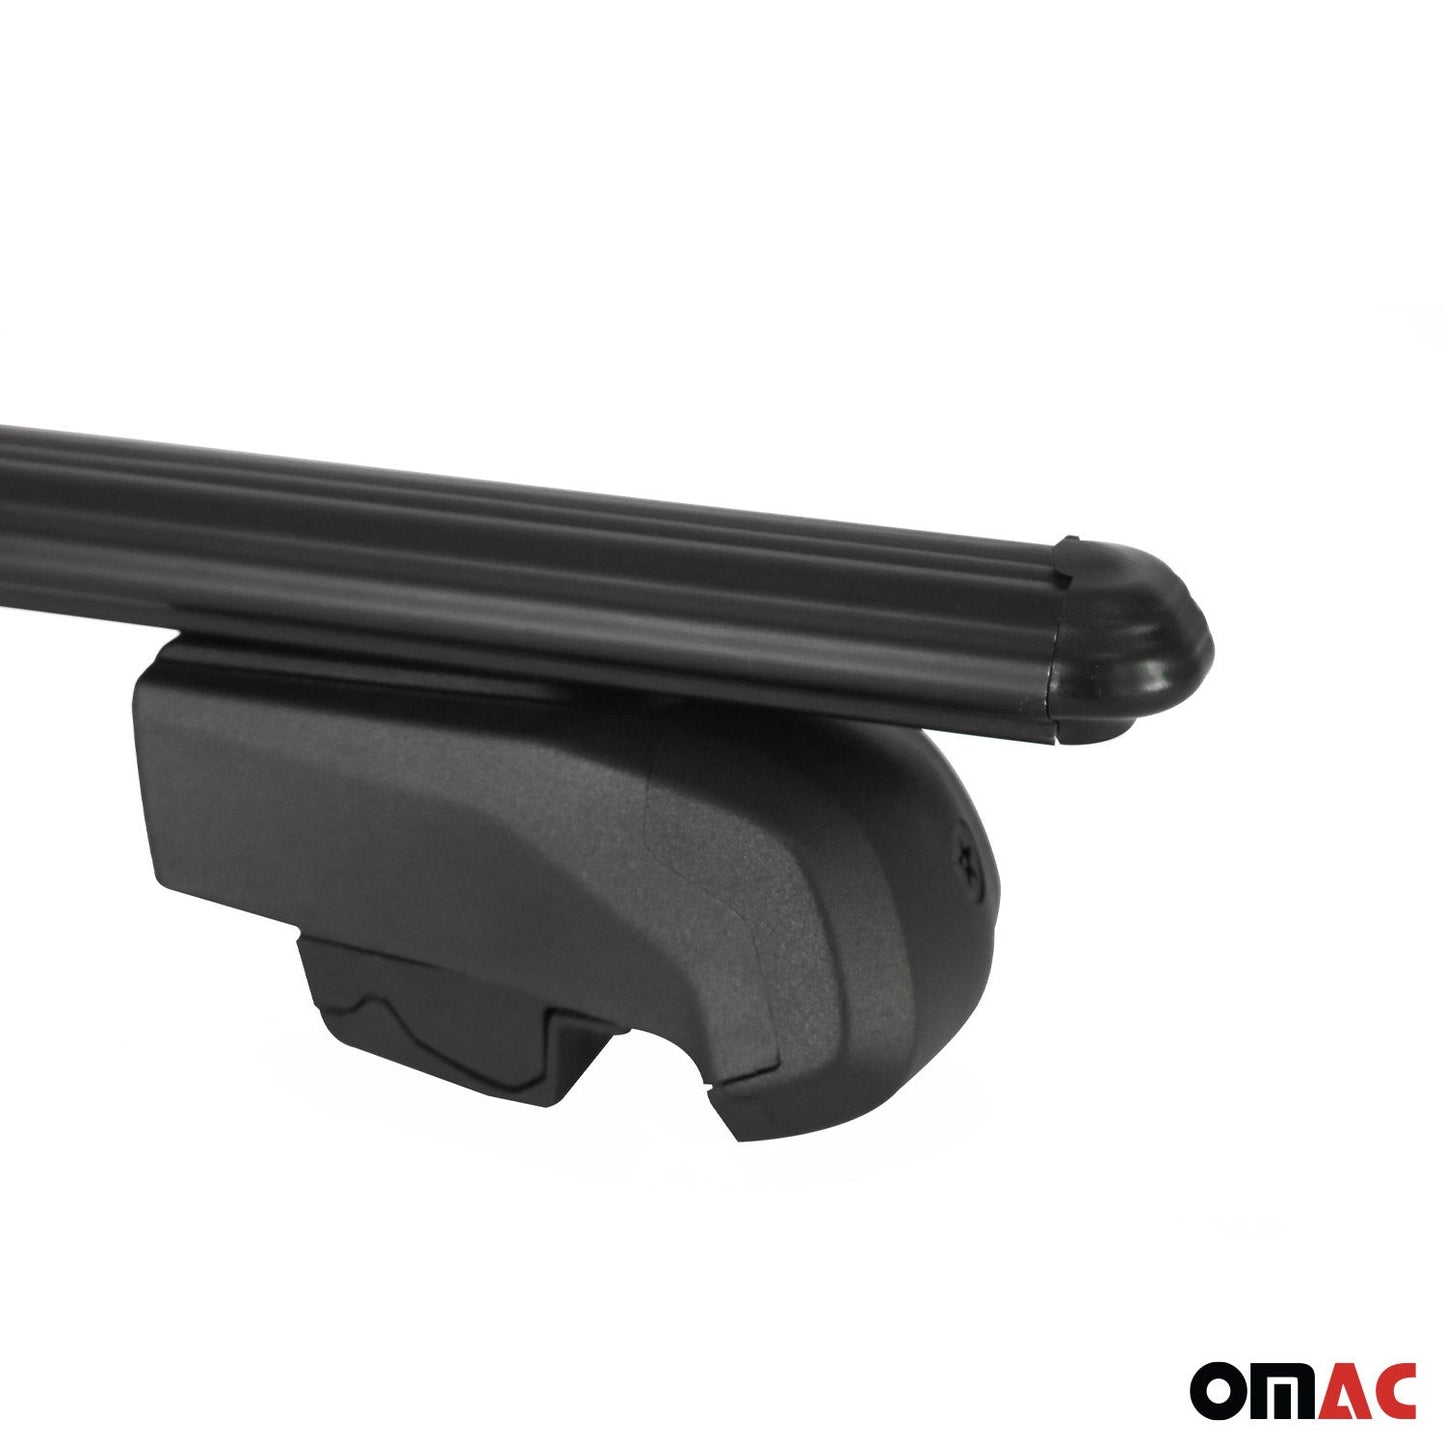 OMAC Lockable Roof Rack Cross Bars Luggage Carrier for Mazda CX-50 2023-2024 Black G003014